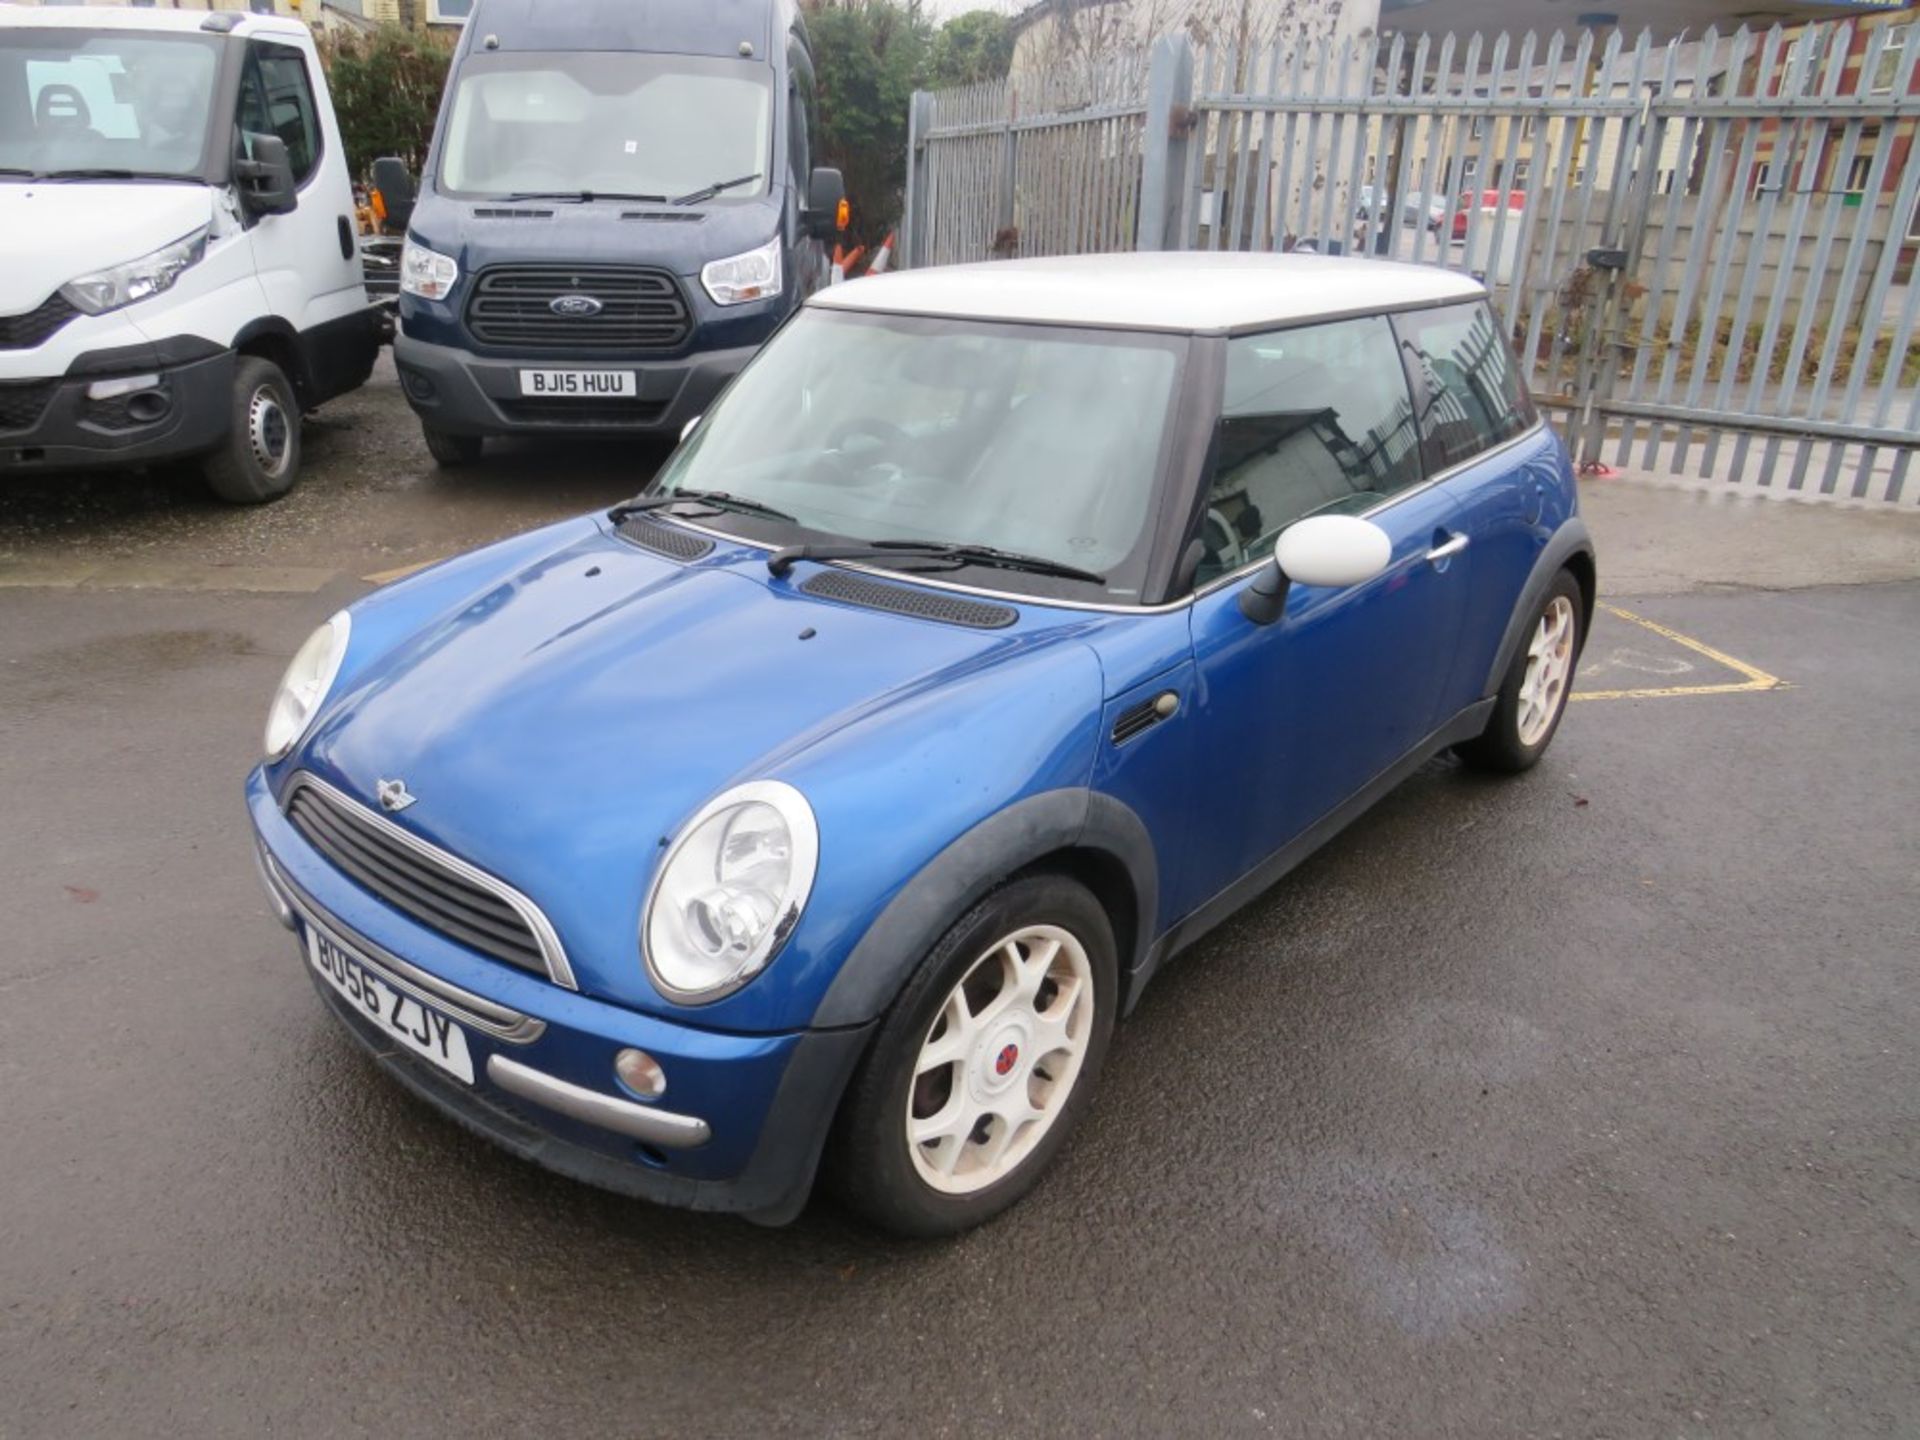 56 reg MINI COOPER, 1ST REG 09/06, TEST 03/21, 107514M NOT WARRANTED, V5 HERE, 10 FORMER KEEPERS [NO - Image 2 of 6